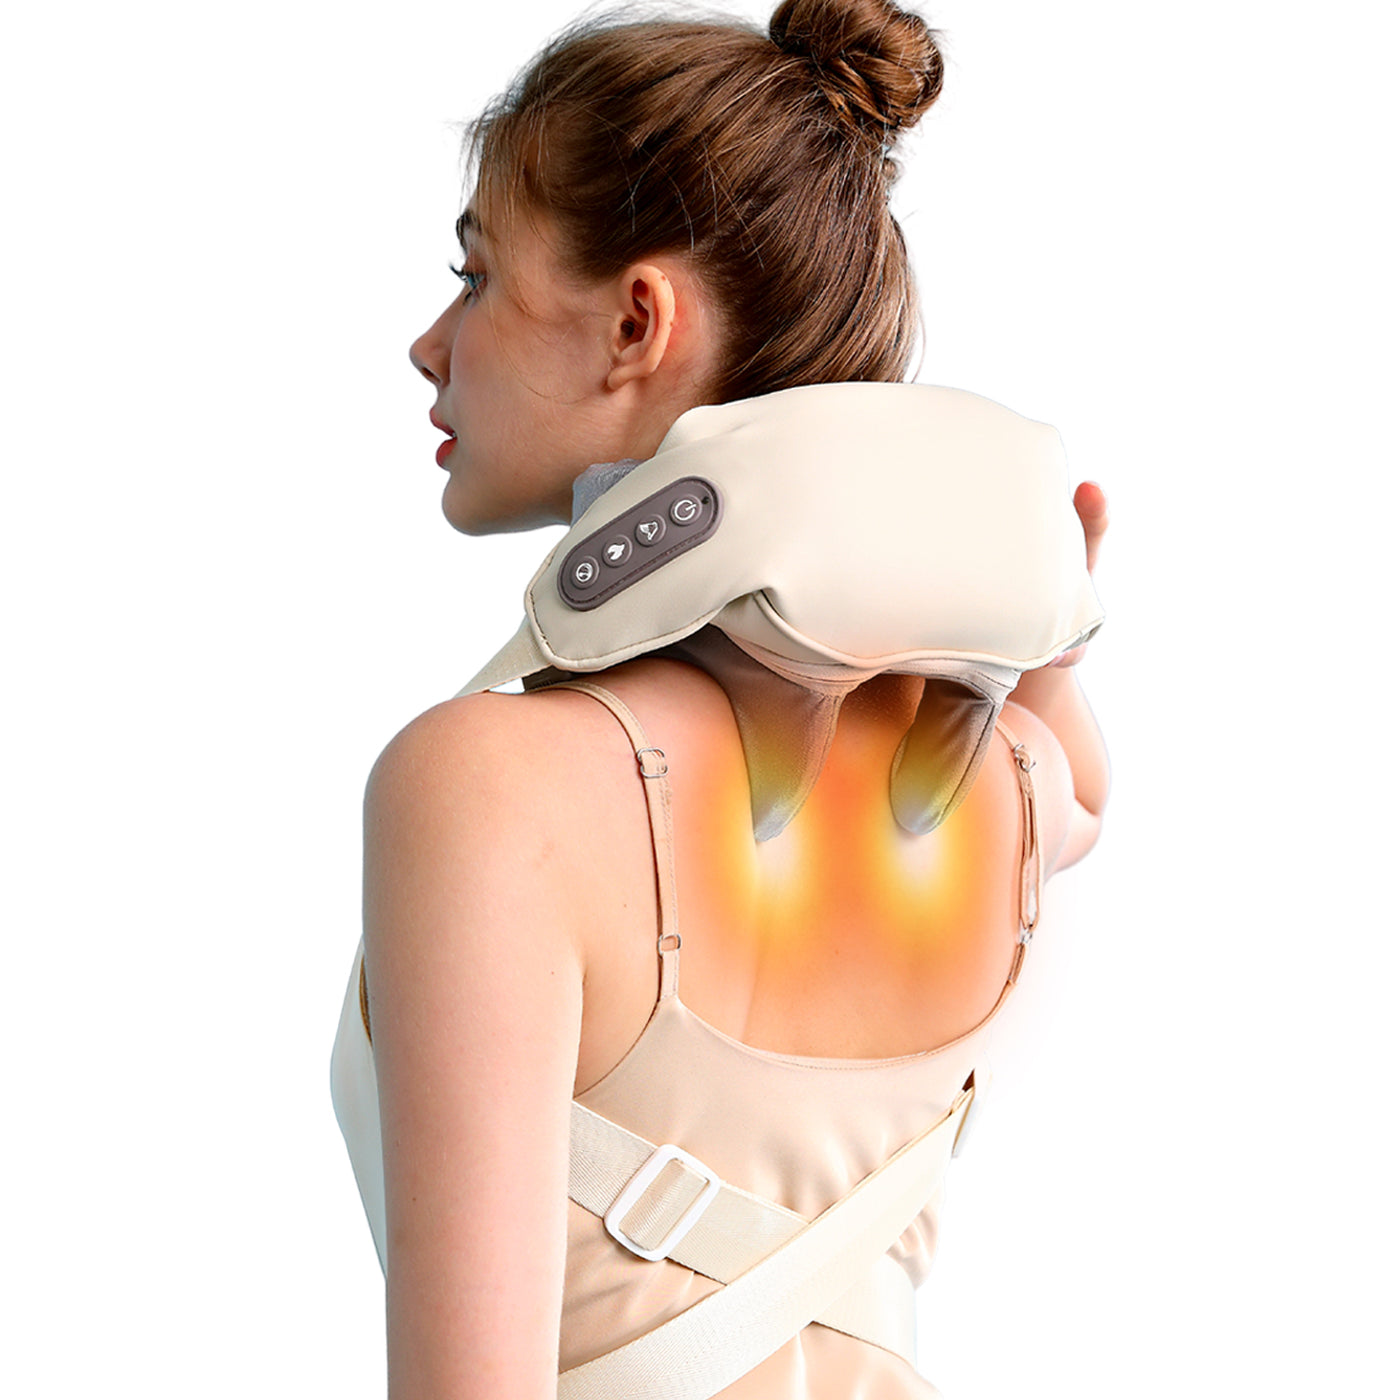 Back Massager, Neck Massager With Heat, Massage Pillow Gifts For